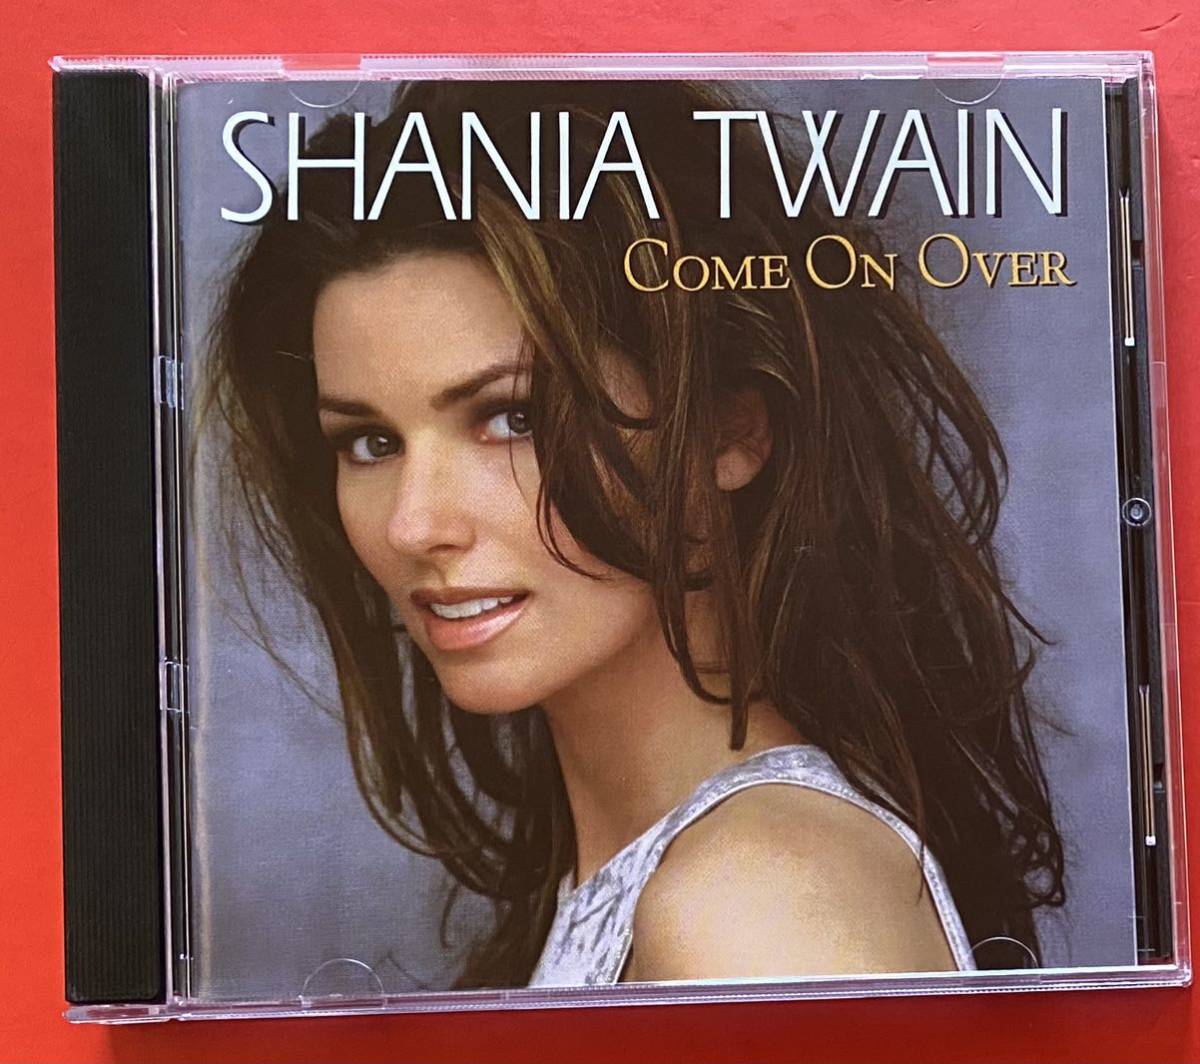 【CD】SHANIA TWAIN「COME ON OVER」シャナイア・トゥエイン 輸入盤 [07180030]_画像1